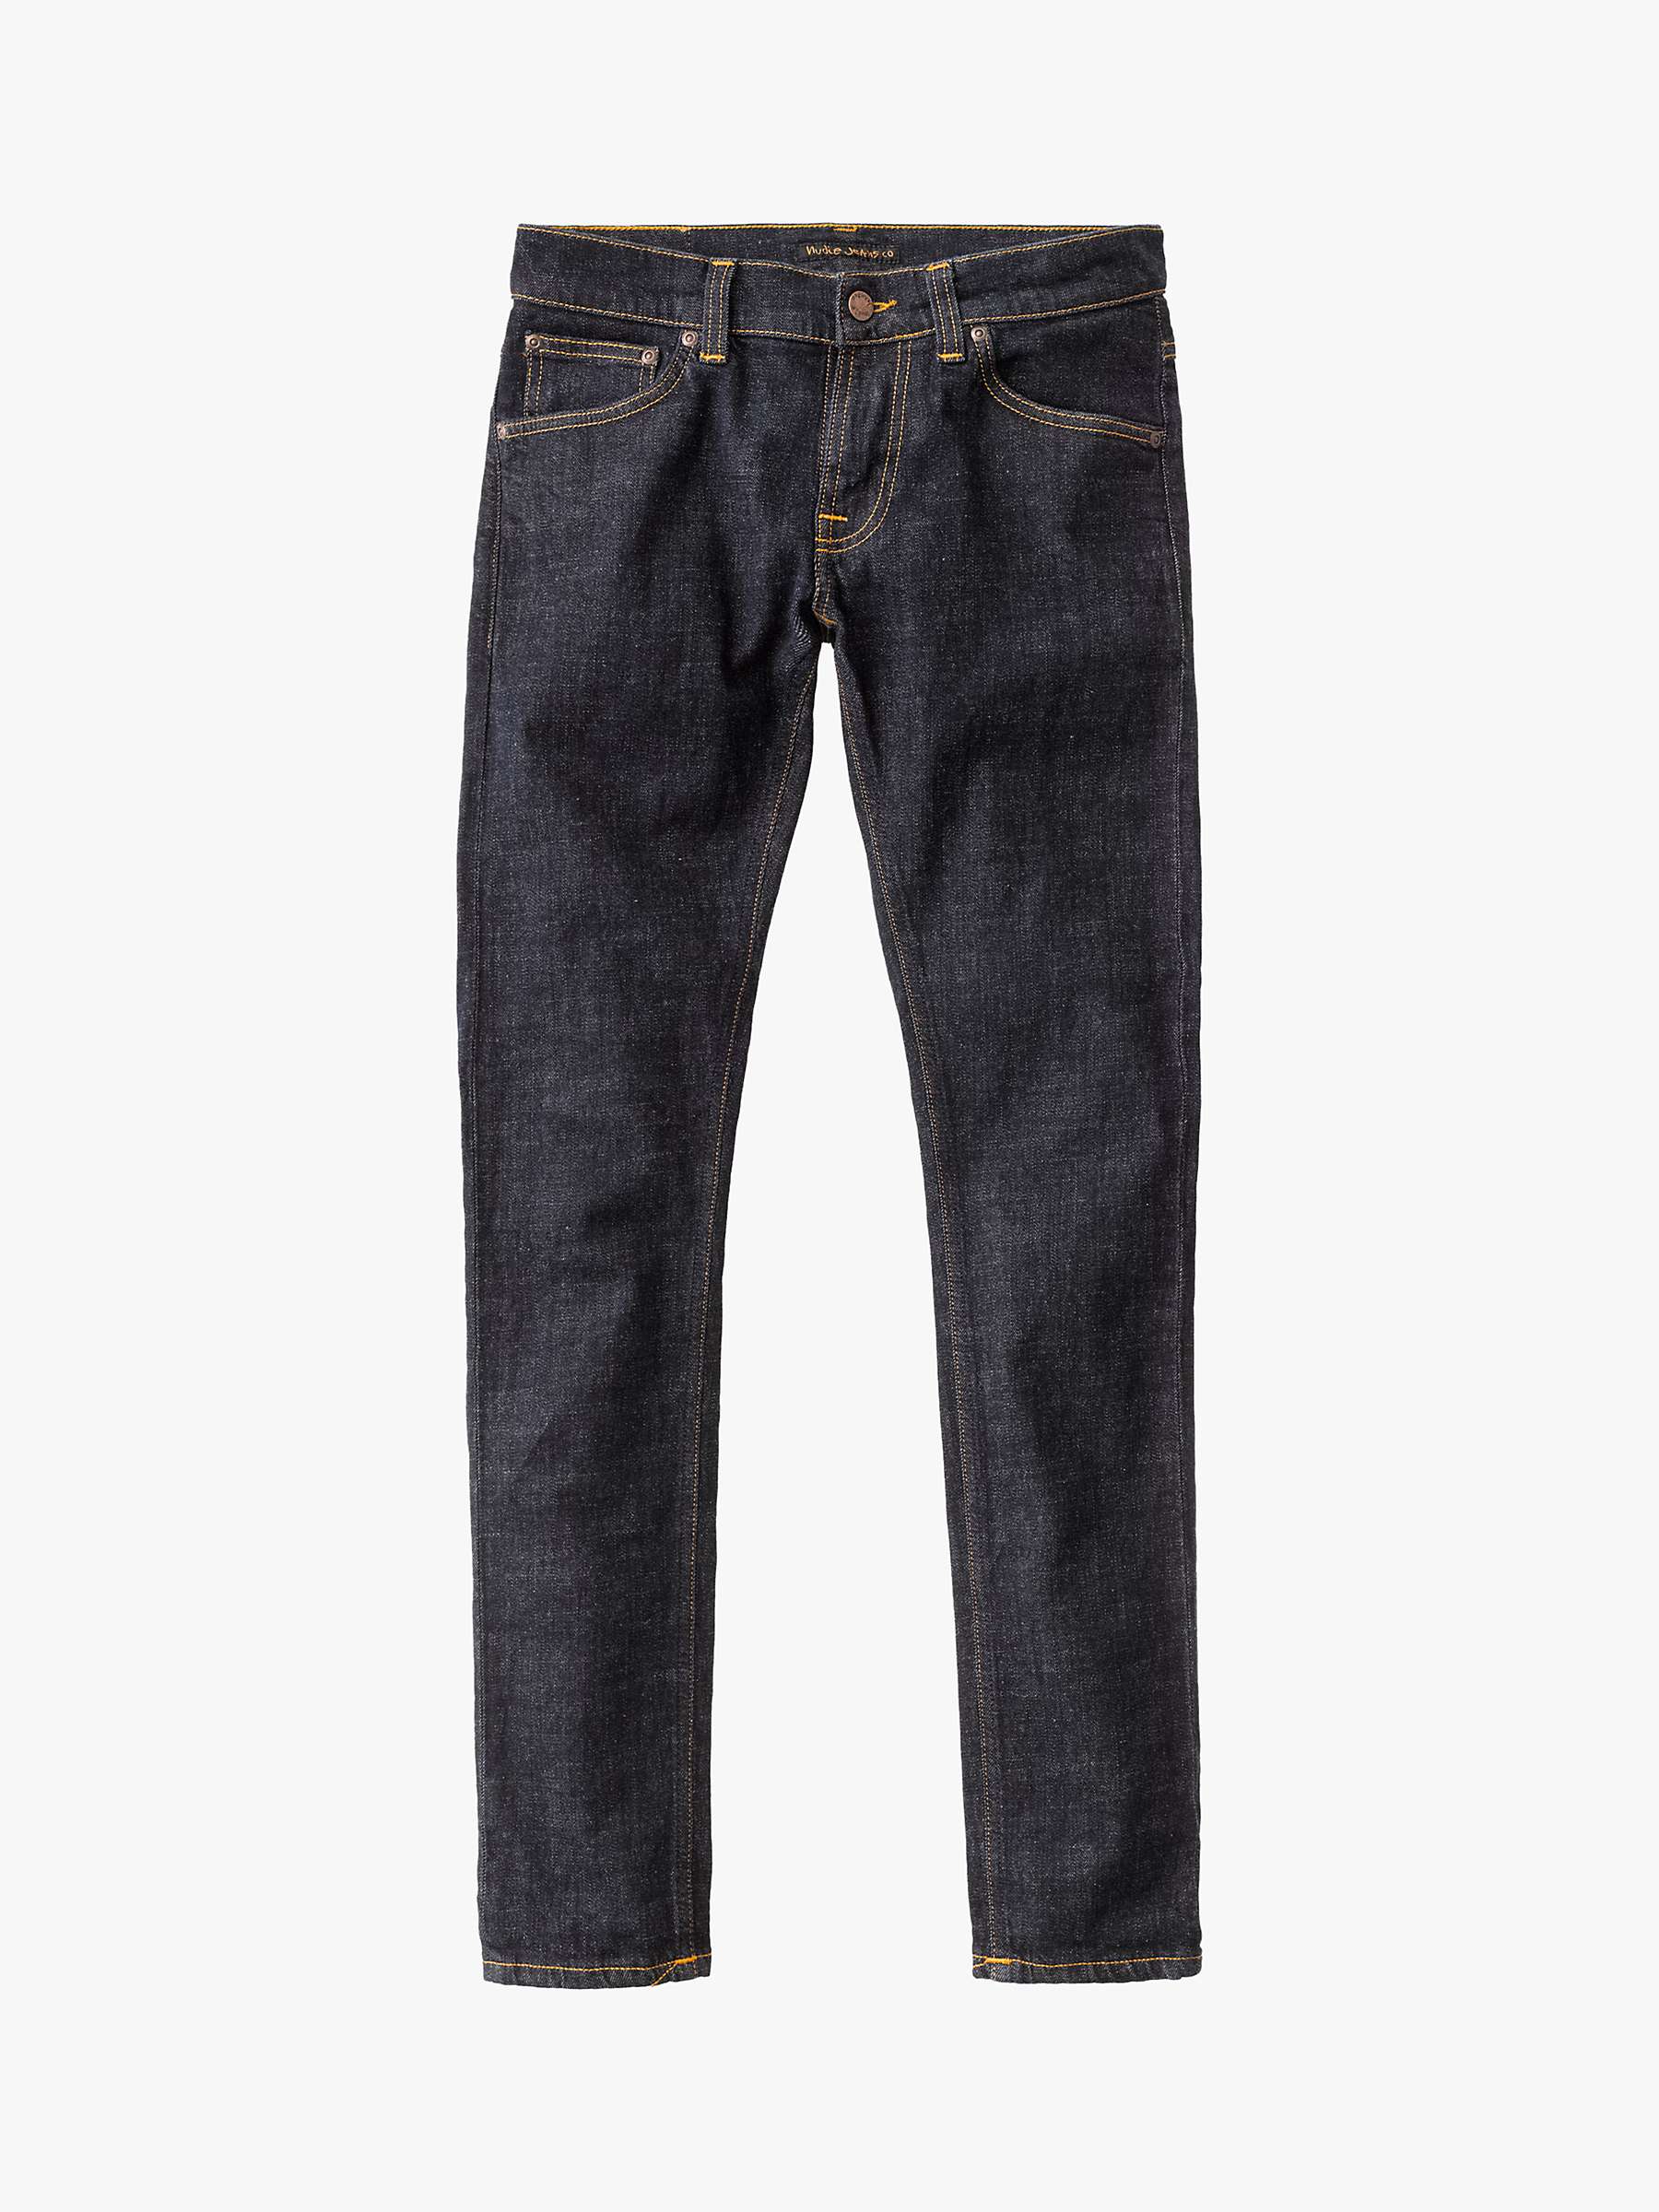 Buy Nudie Jeans Slim Tight Terry Jeans, Rinse Twill Online at johnlewis.com